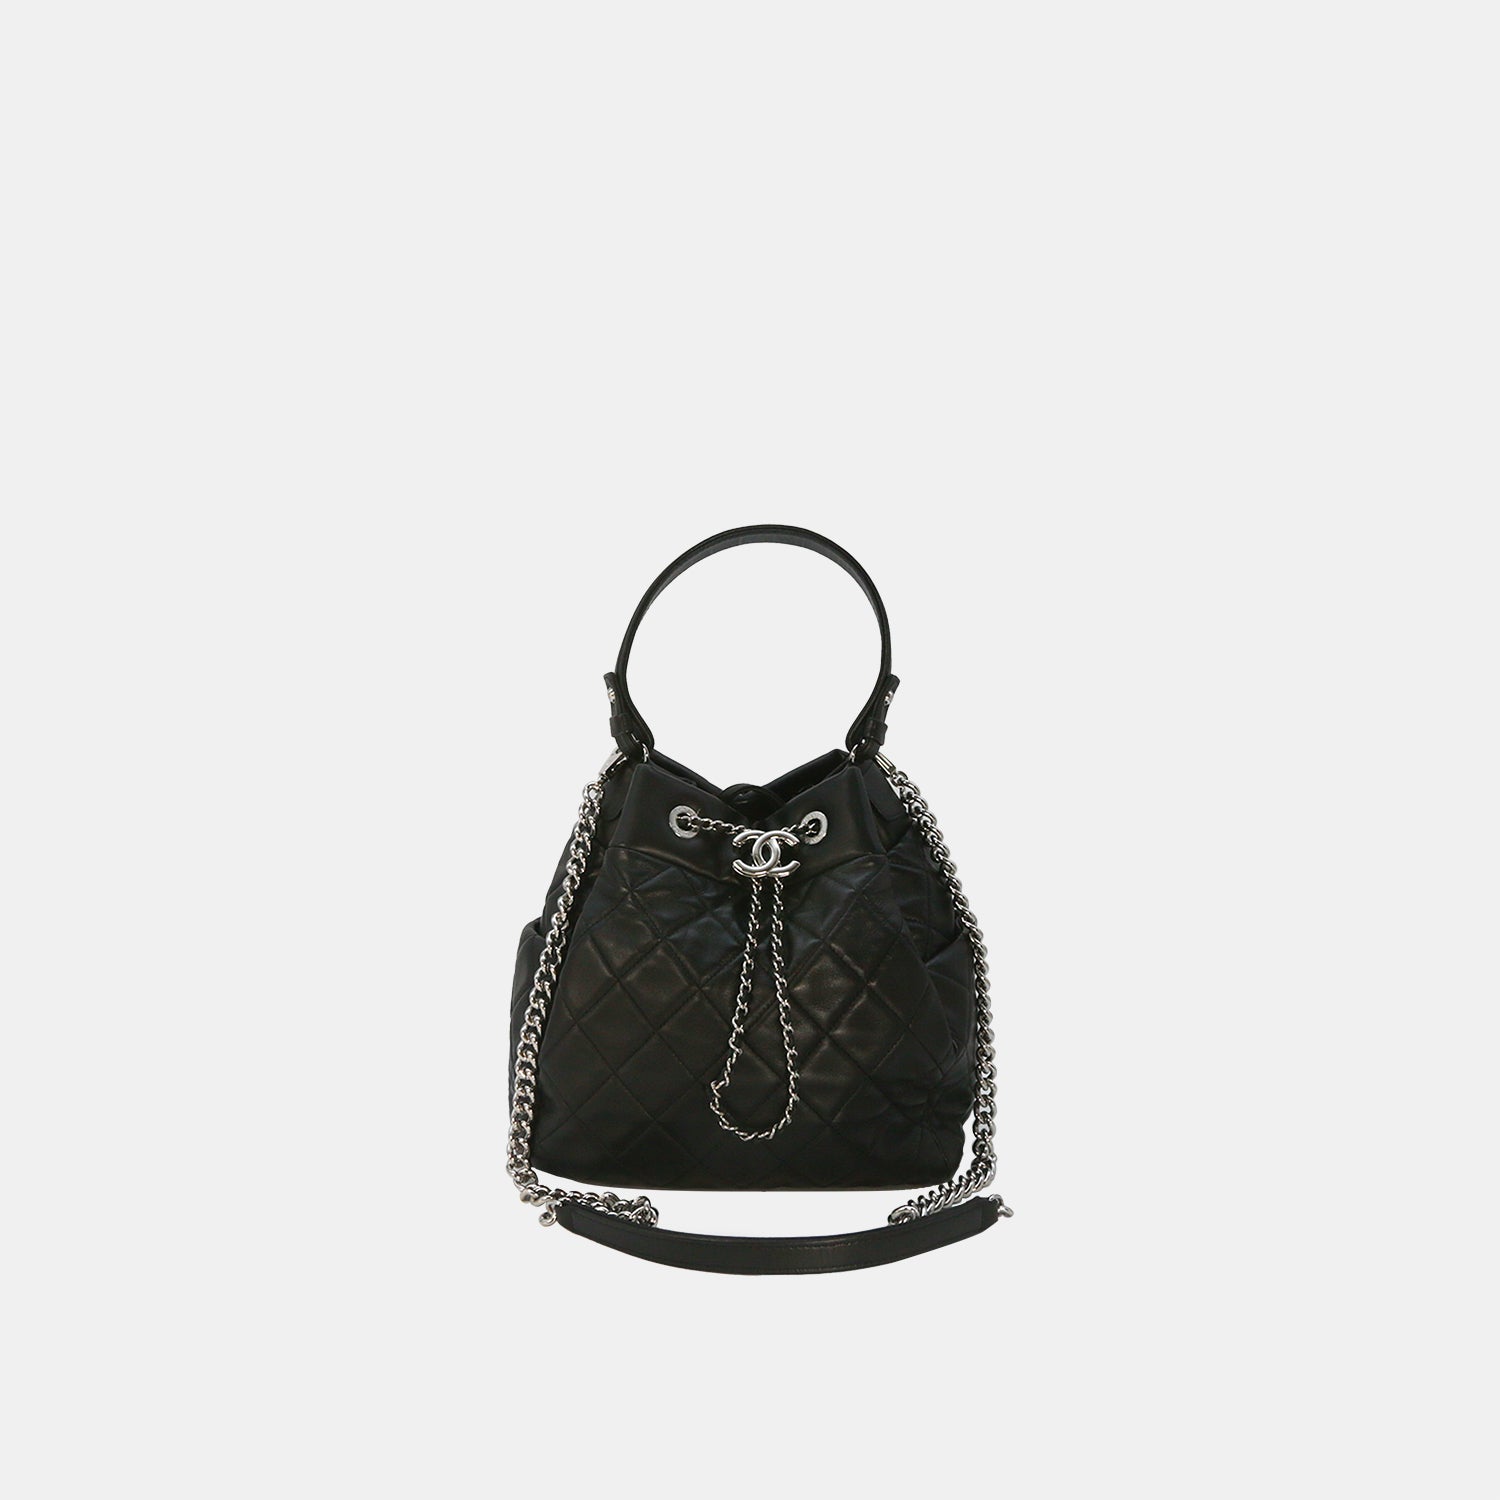 Affordable chanel bucket bag caviar For Sale, Cross-body Bags